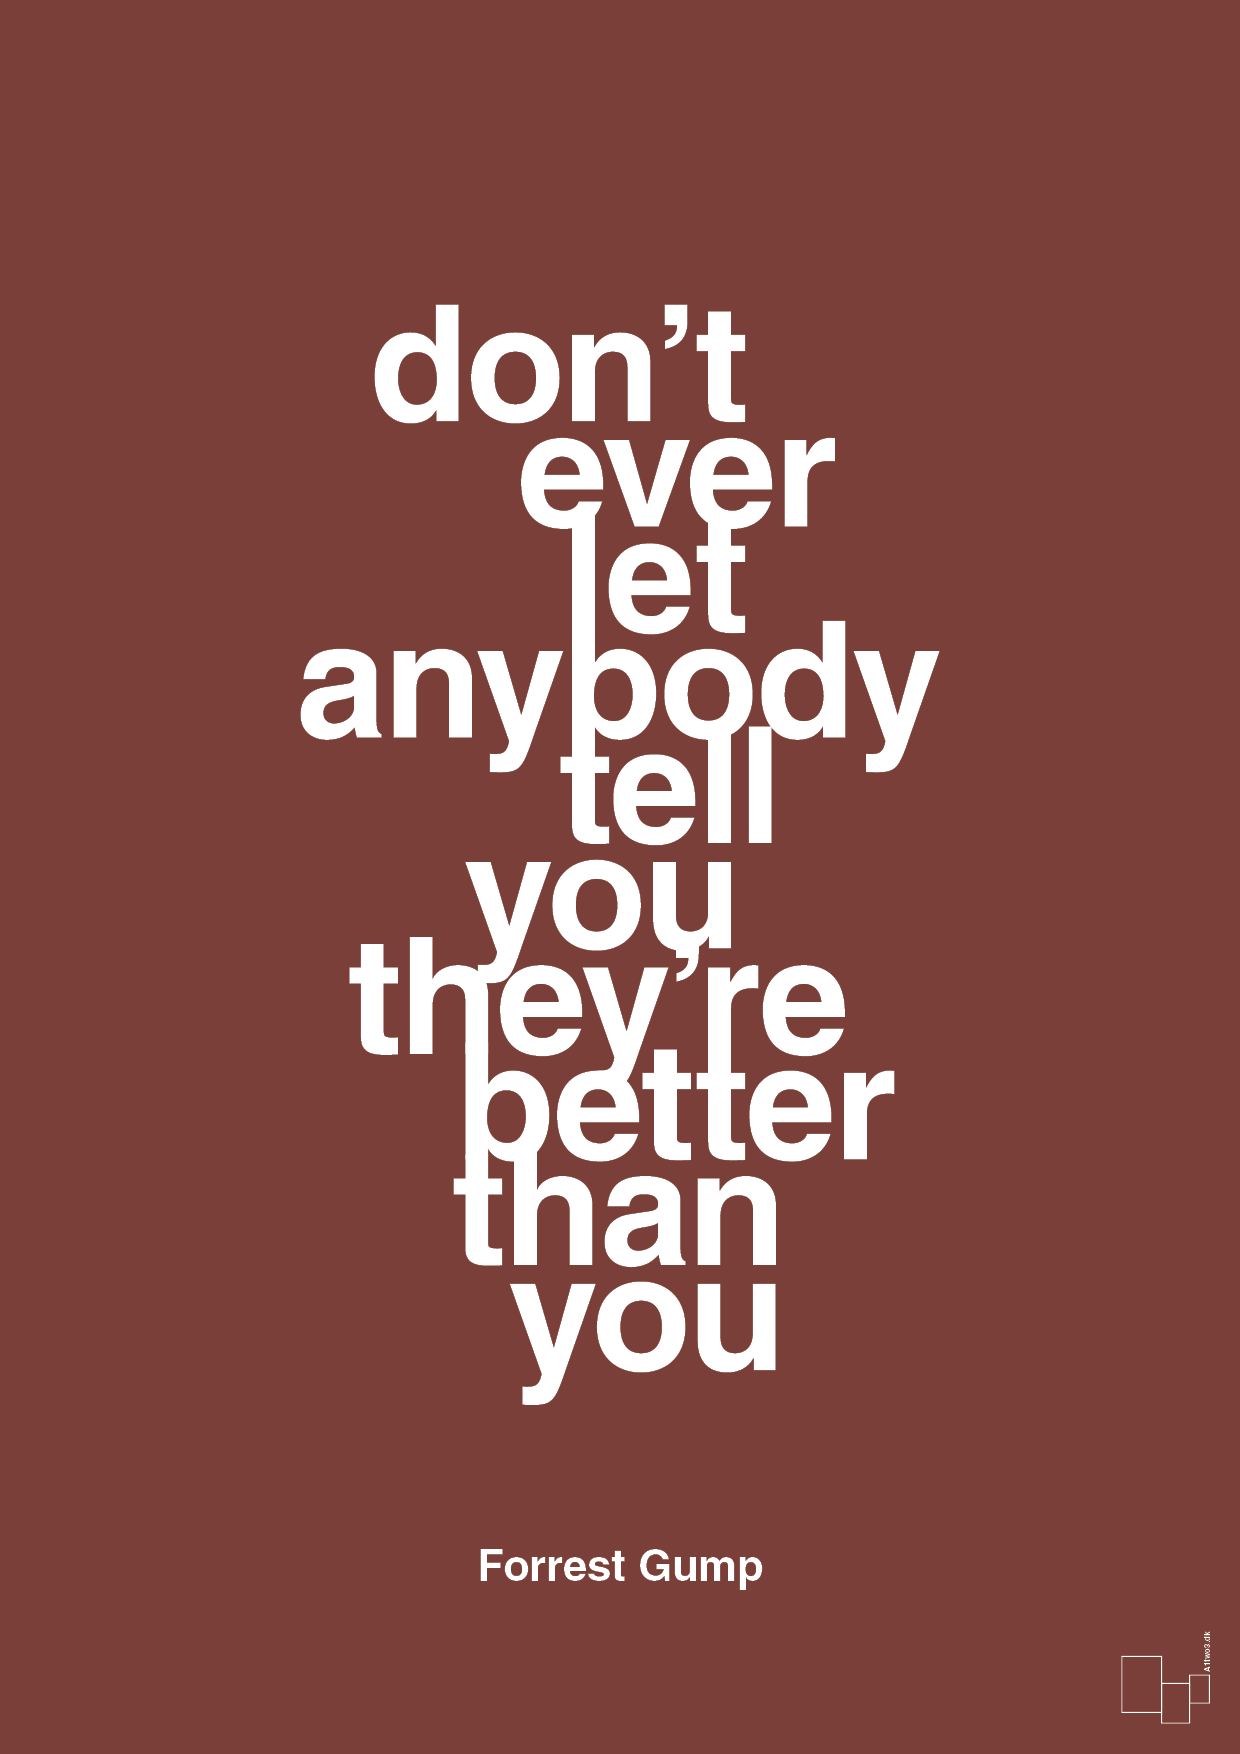 don’t ever let anybody tell you they’re better than you - Plakat med Citater i Red Pepper